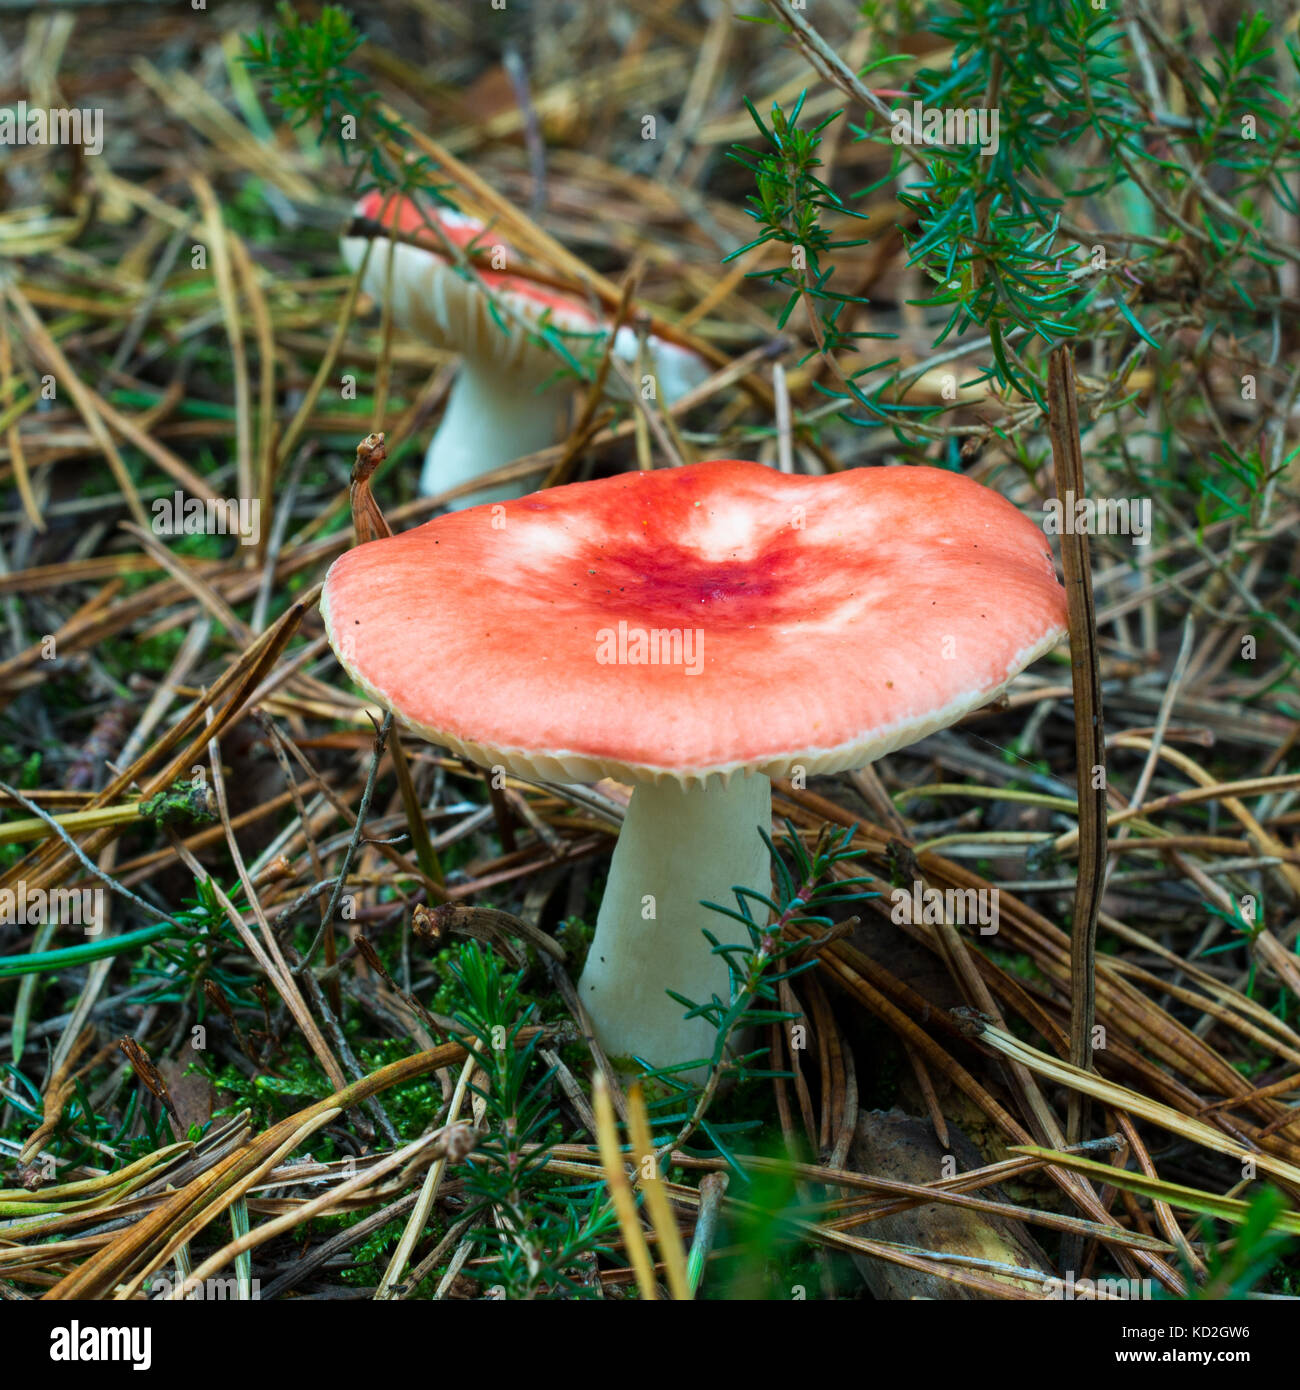 Red toadstool, New Forest, Hampshire, UK, October. Stock Photo